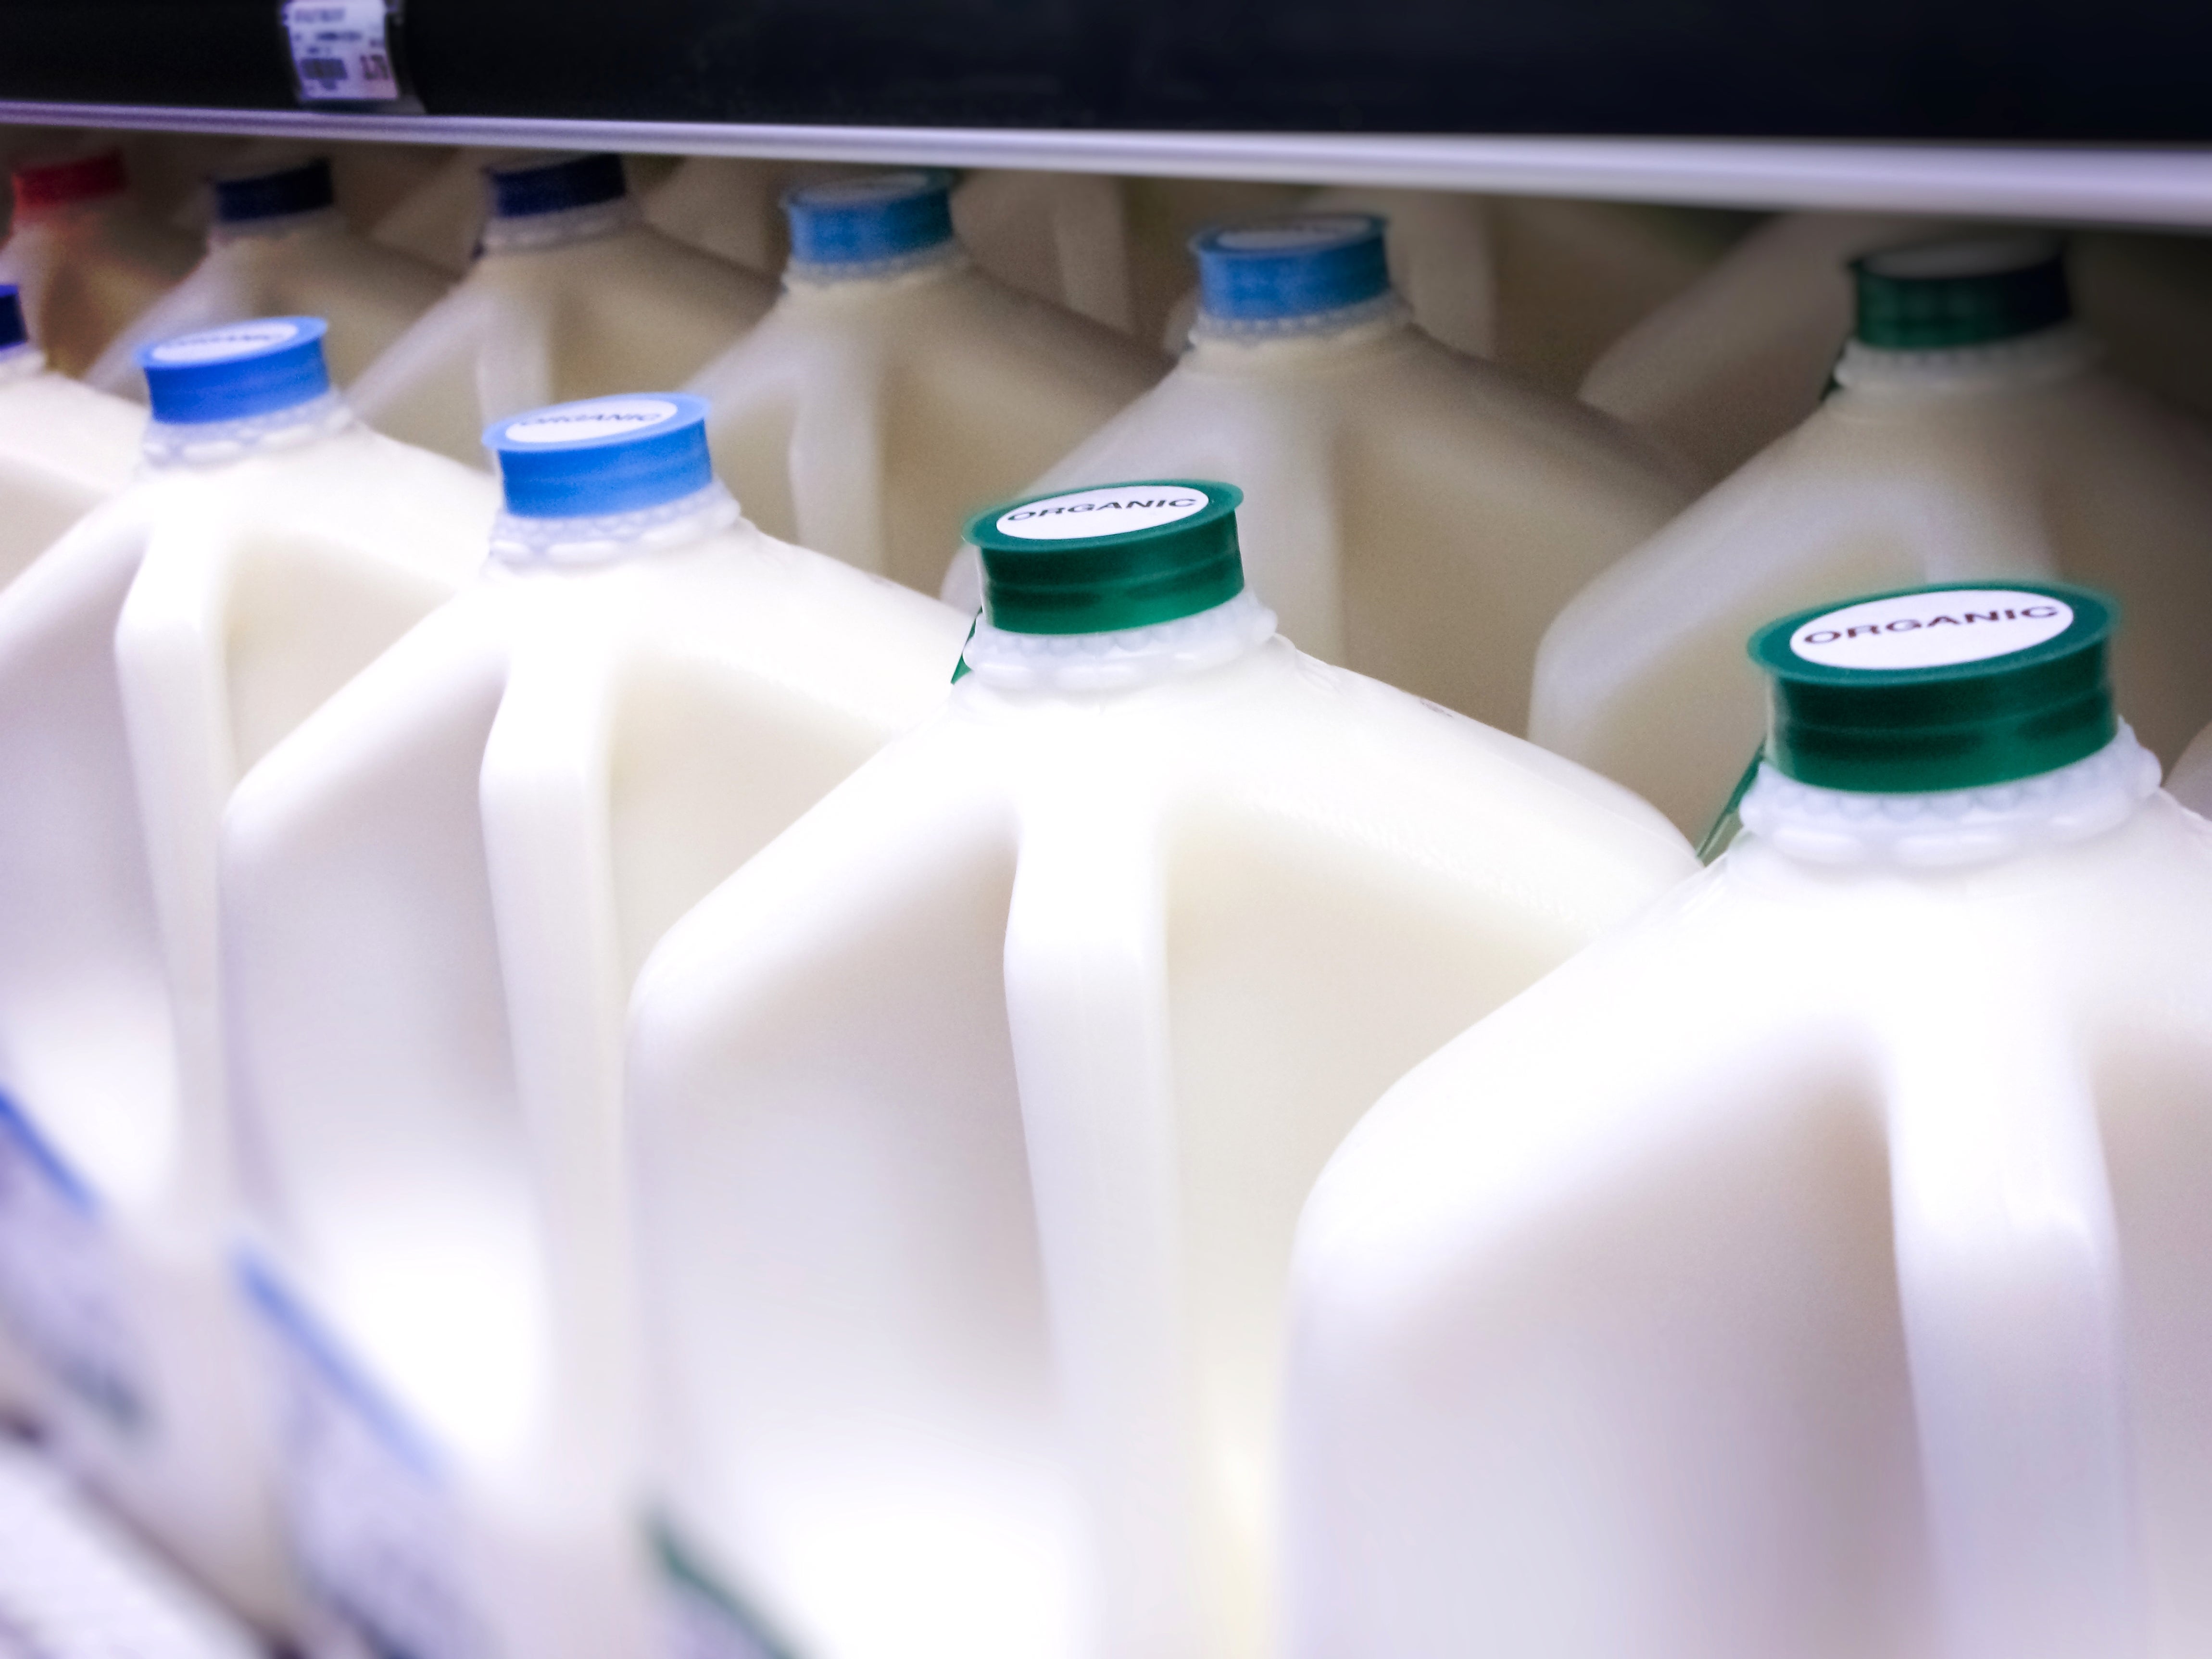 Family sparks meme after revealing they purchase 12 gallons of milk a week